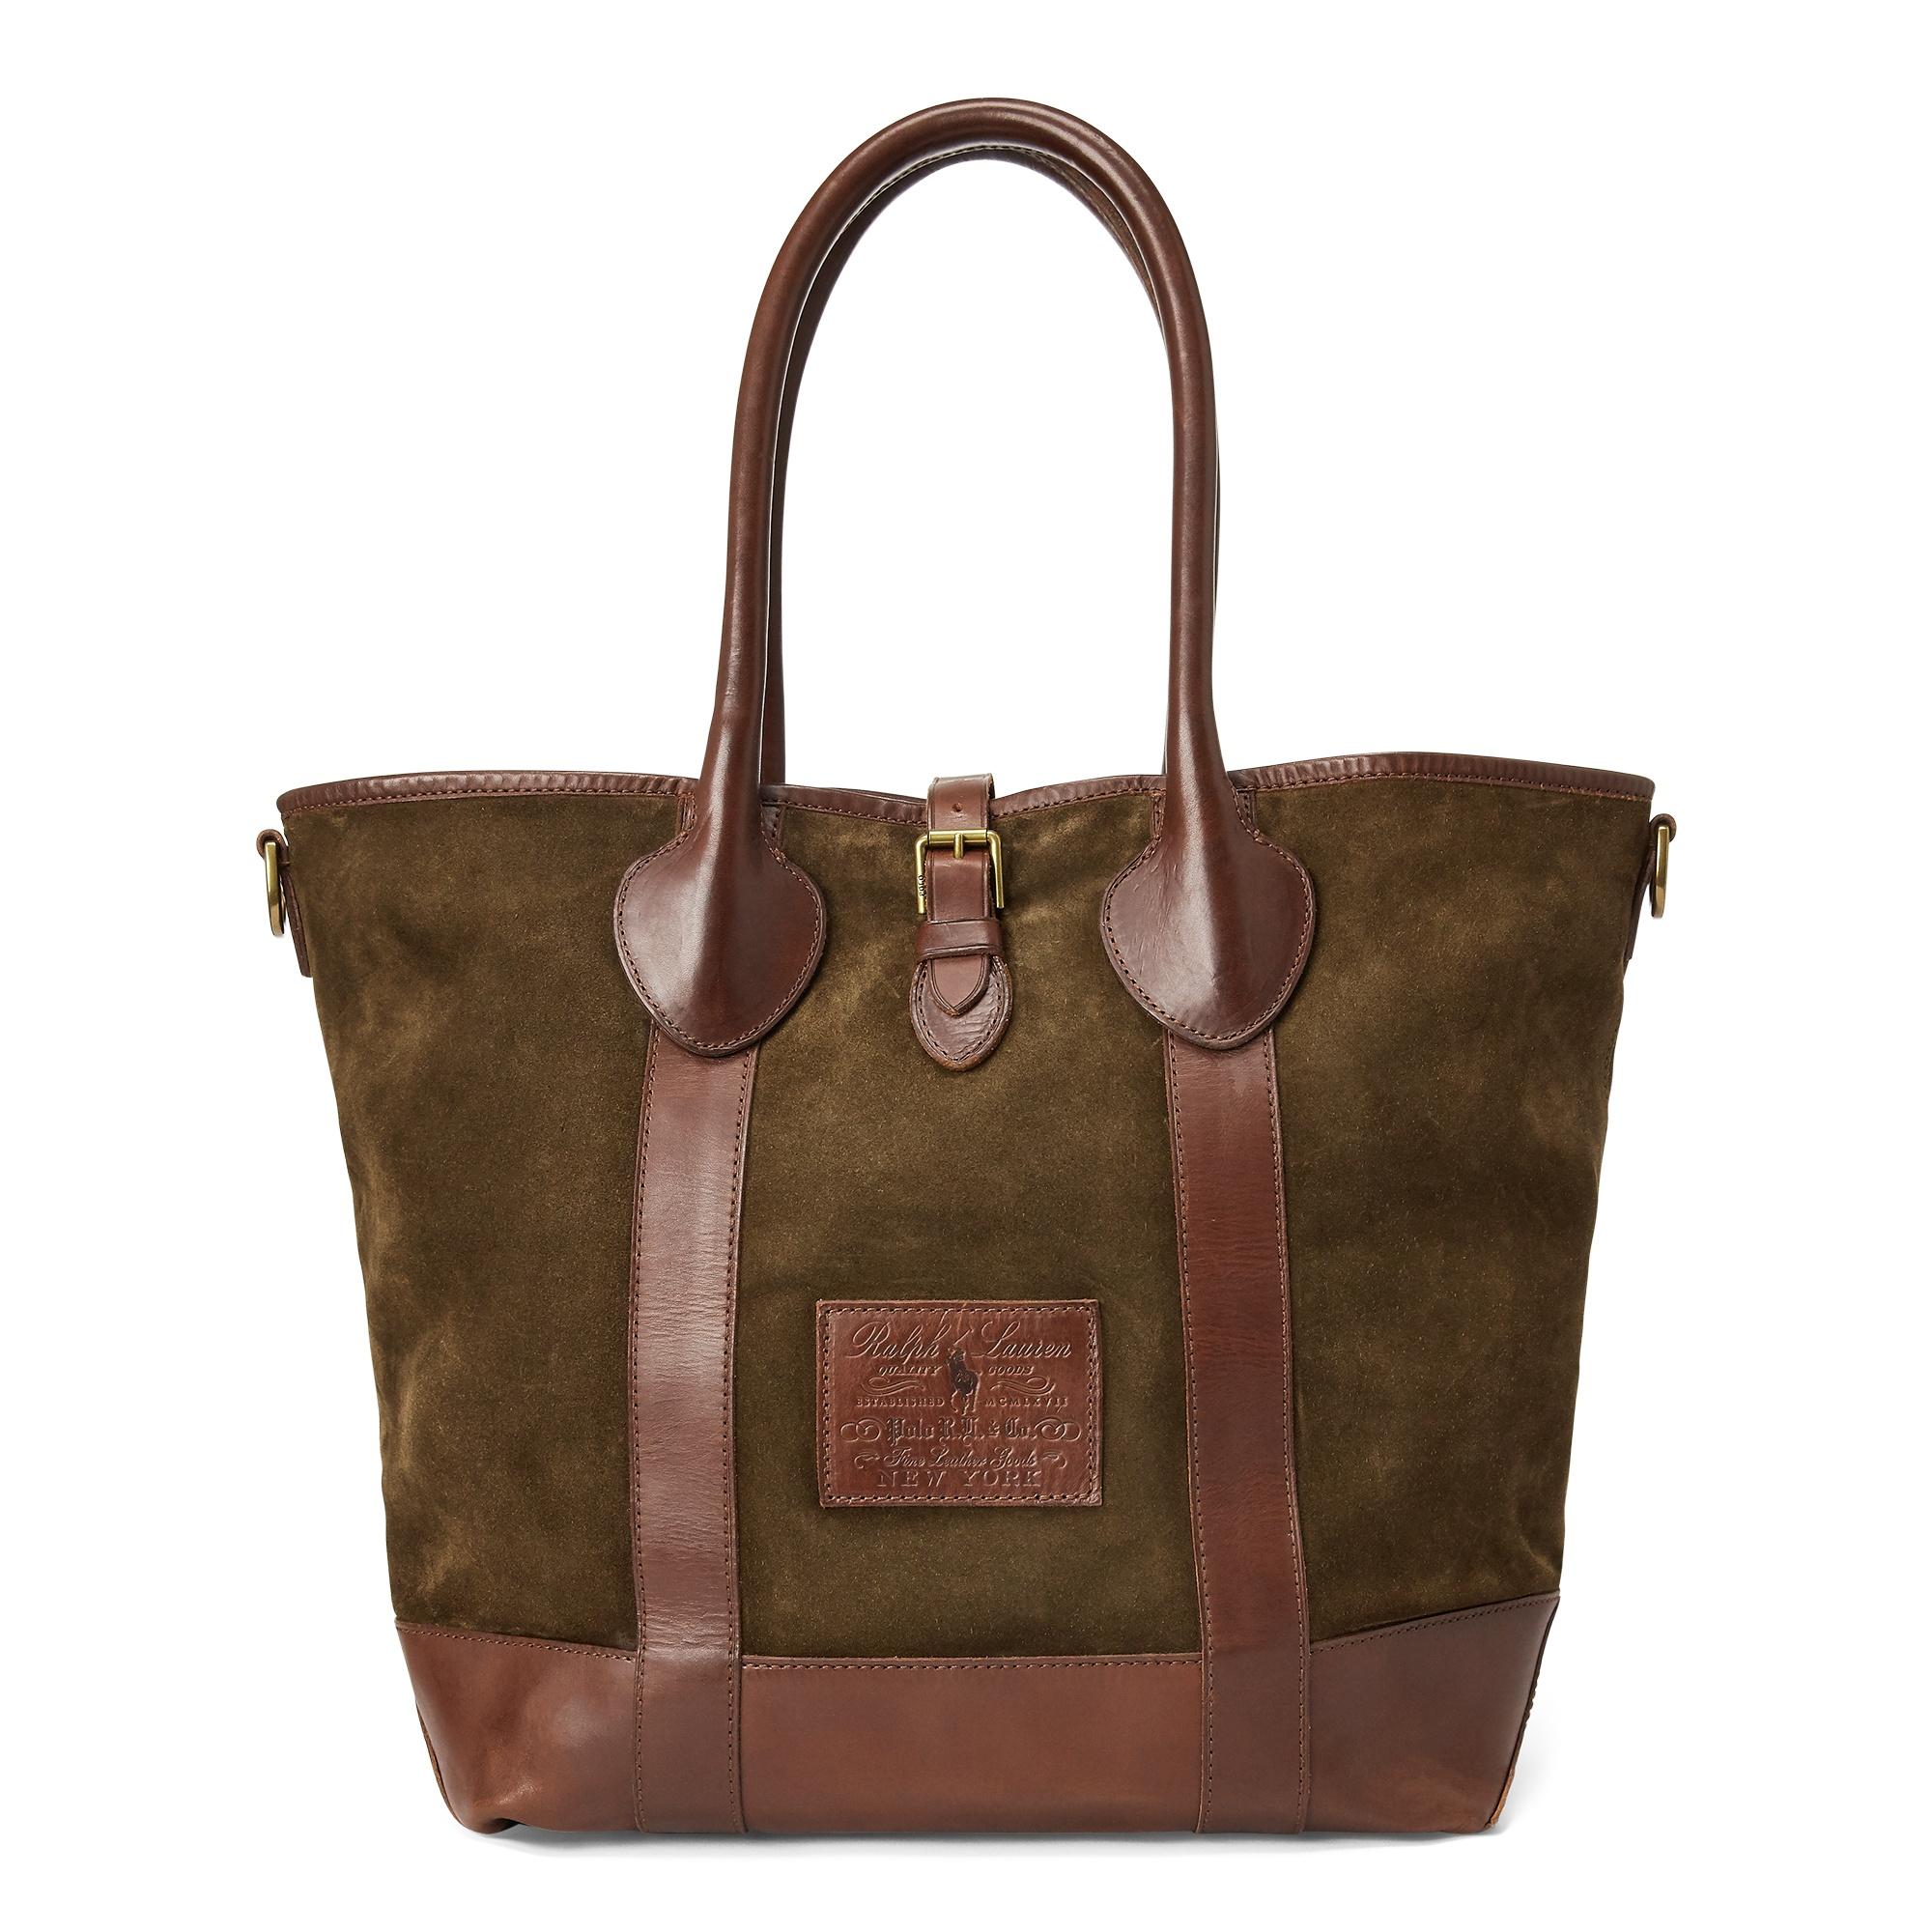 Polo Ralph Lauren Heritage Suede Tote in Olive (Green) for Men - Lyst